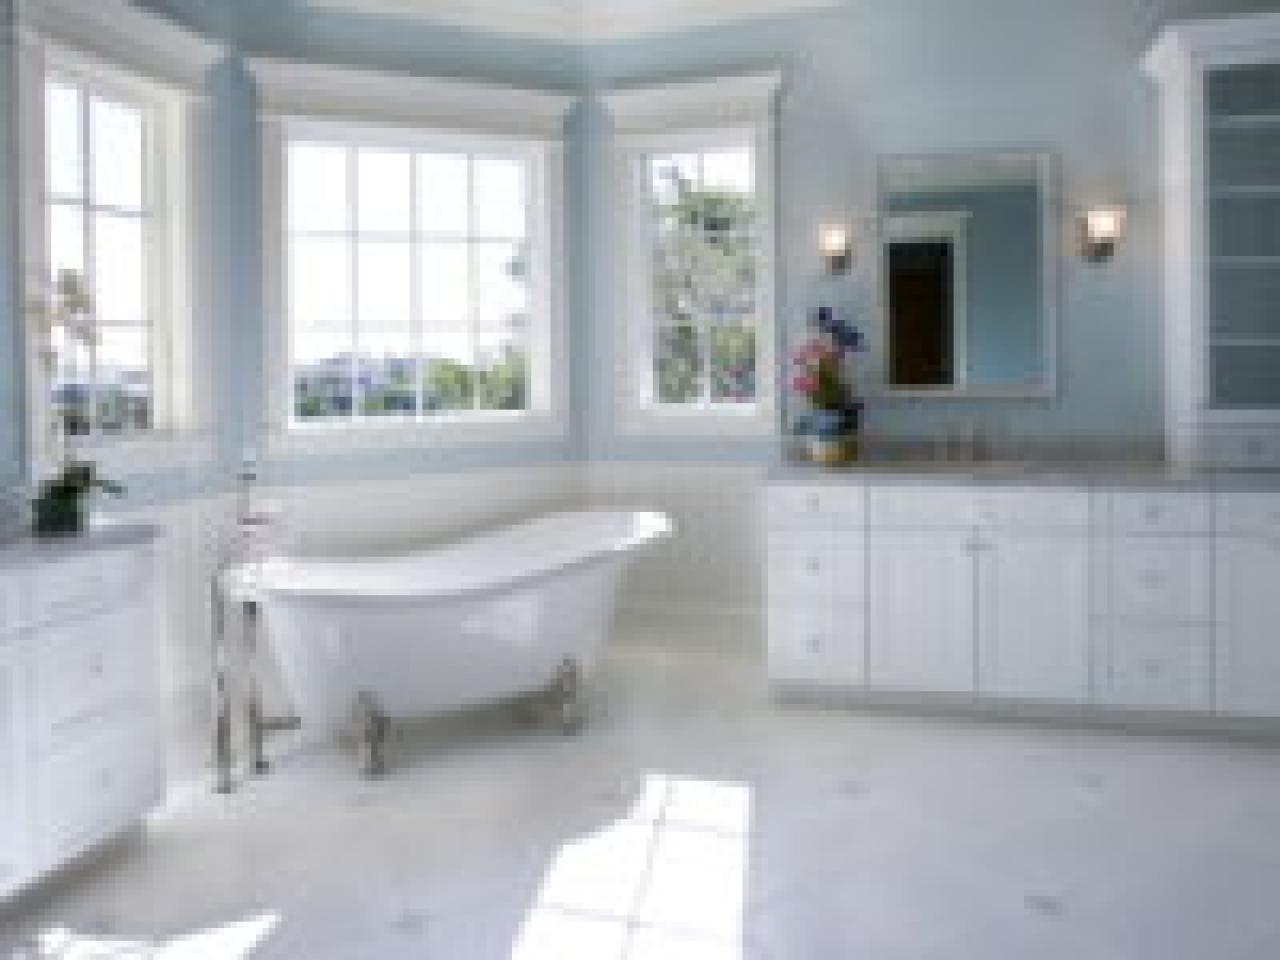 Find Inspiration For Your New Bathroom HGTV